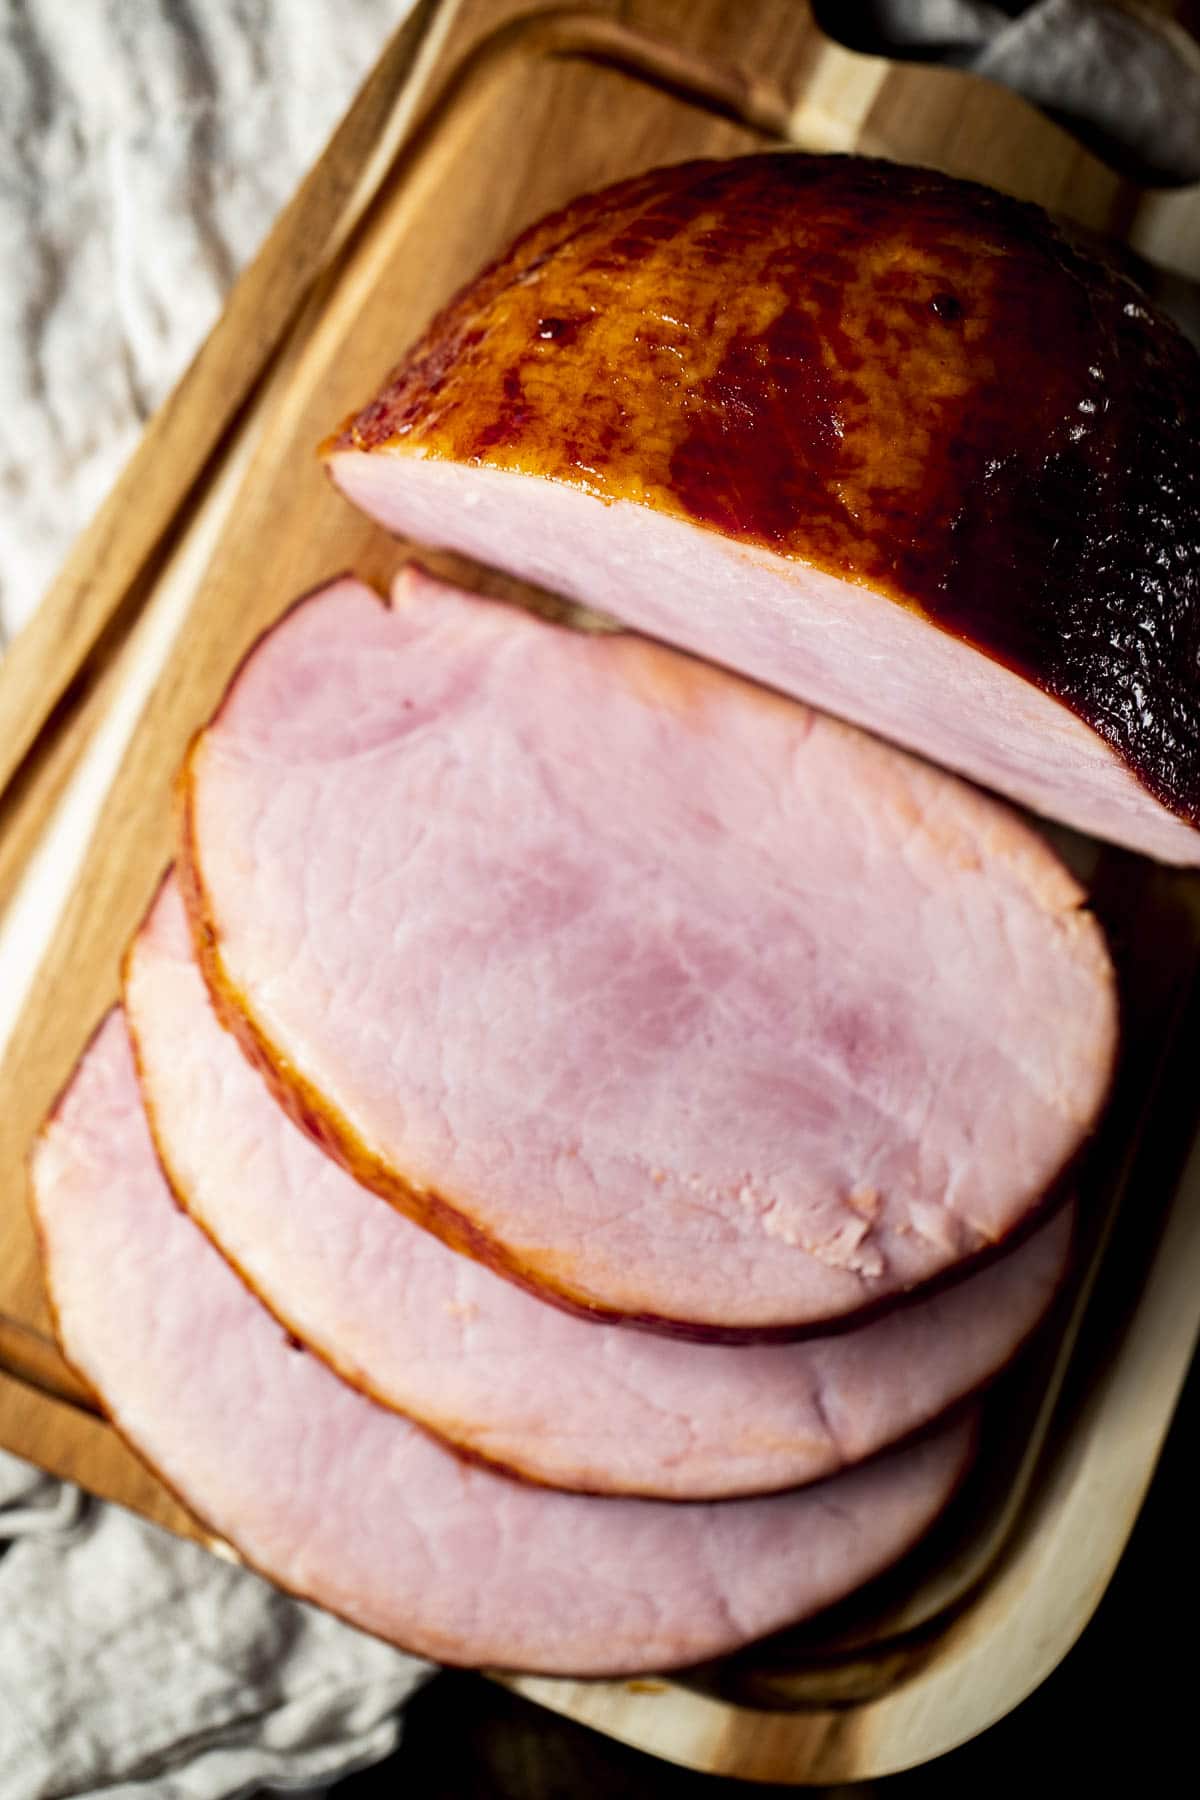 Overhead view of sliced ham on a wooden cutting board.